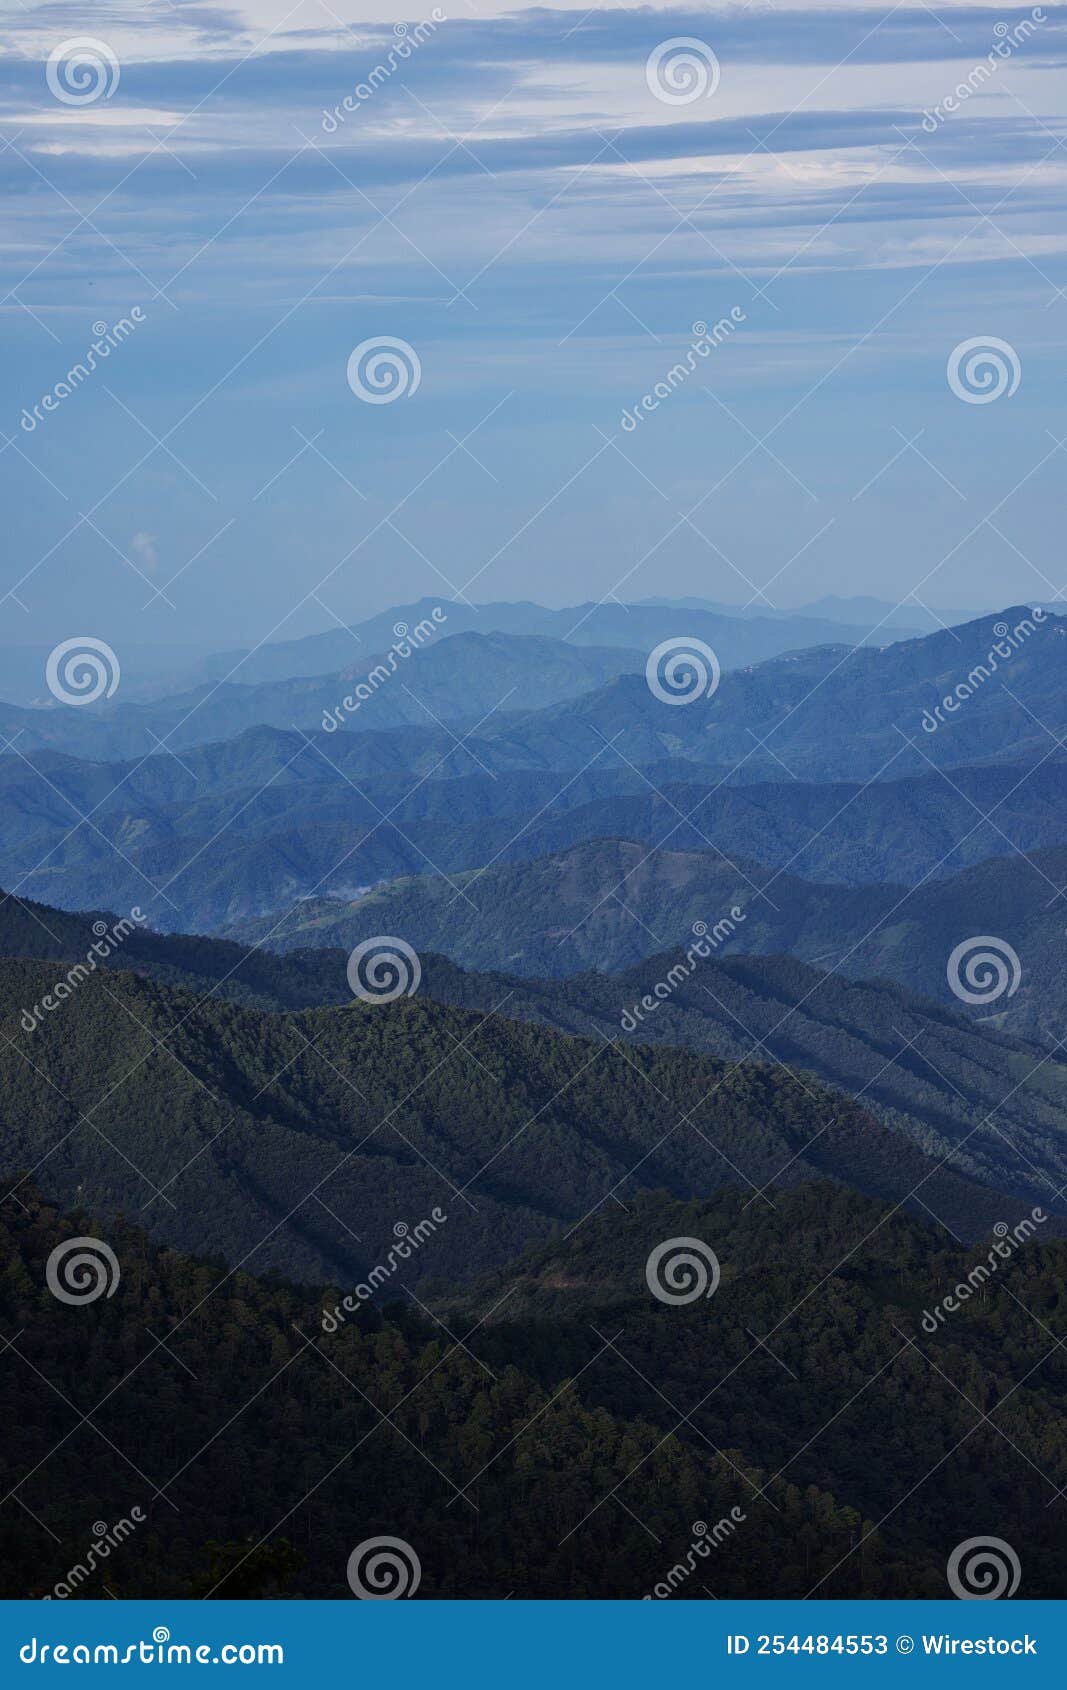 vertical view of the tree-covered mountains landscape under the blue sky in san jose del pacifico